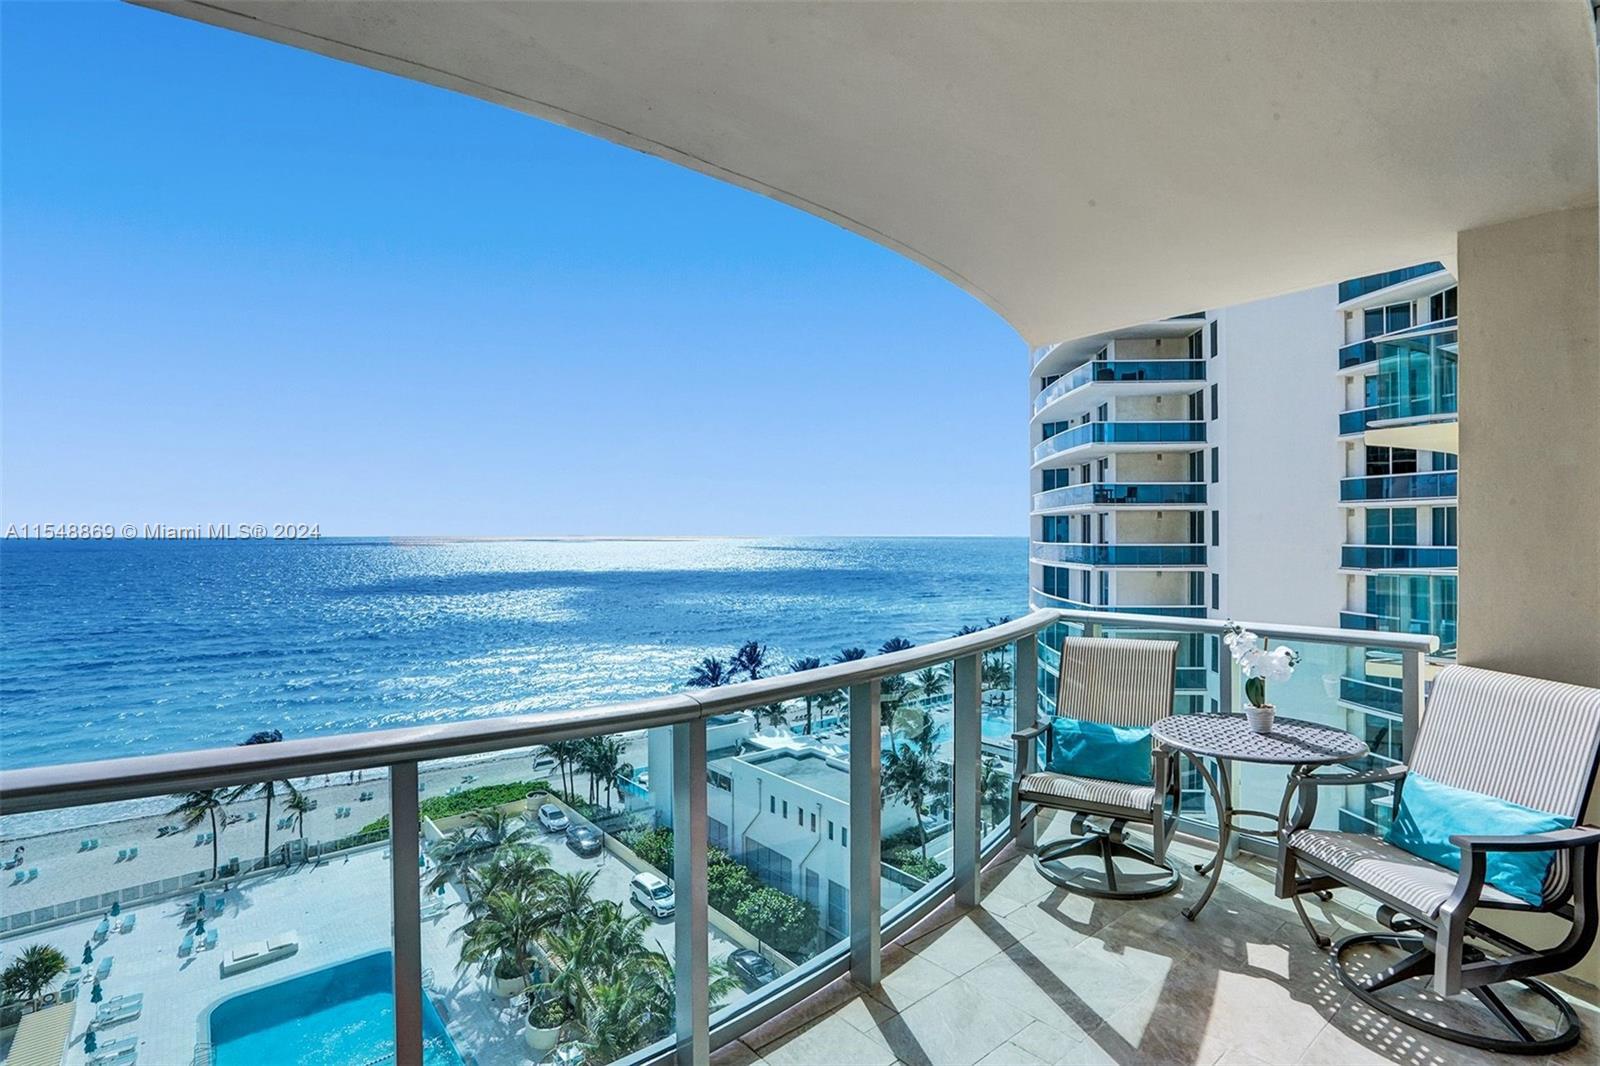 Photo of 2501 S Ocean Dr #1124 (Available April 15) in Hollywood, FL